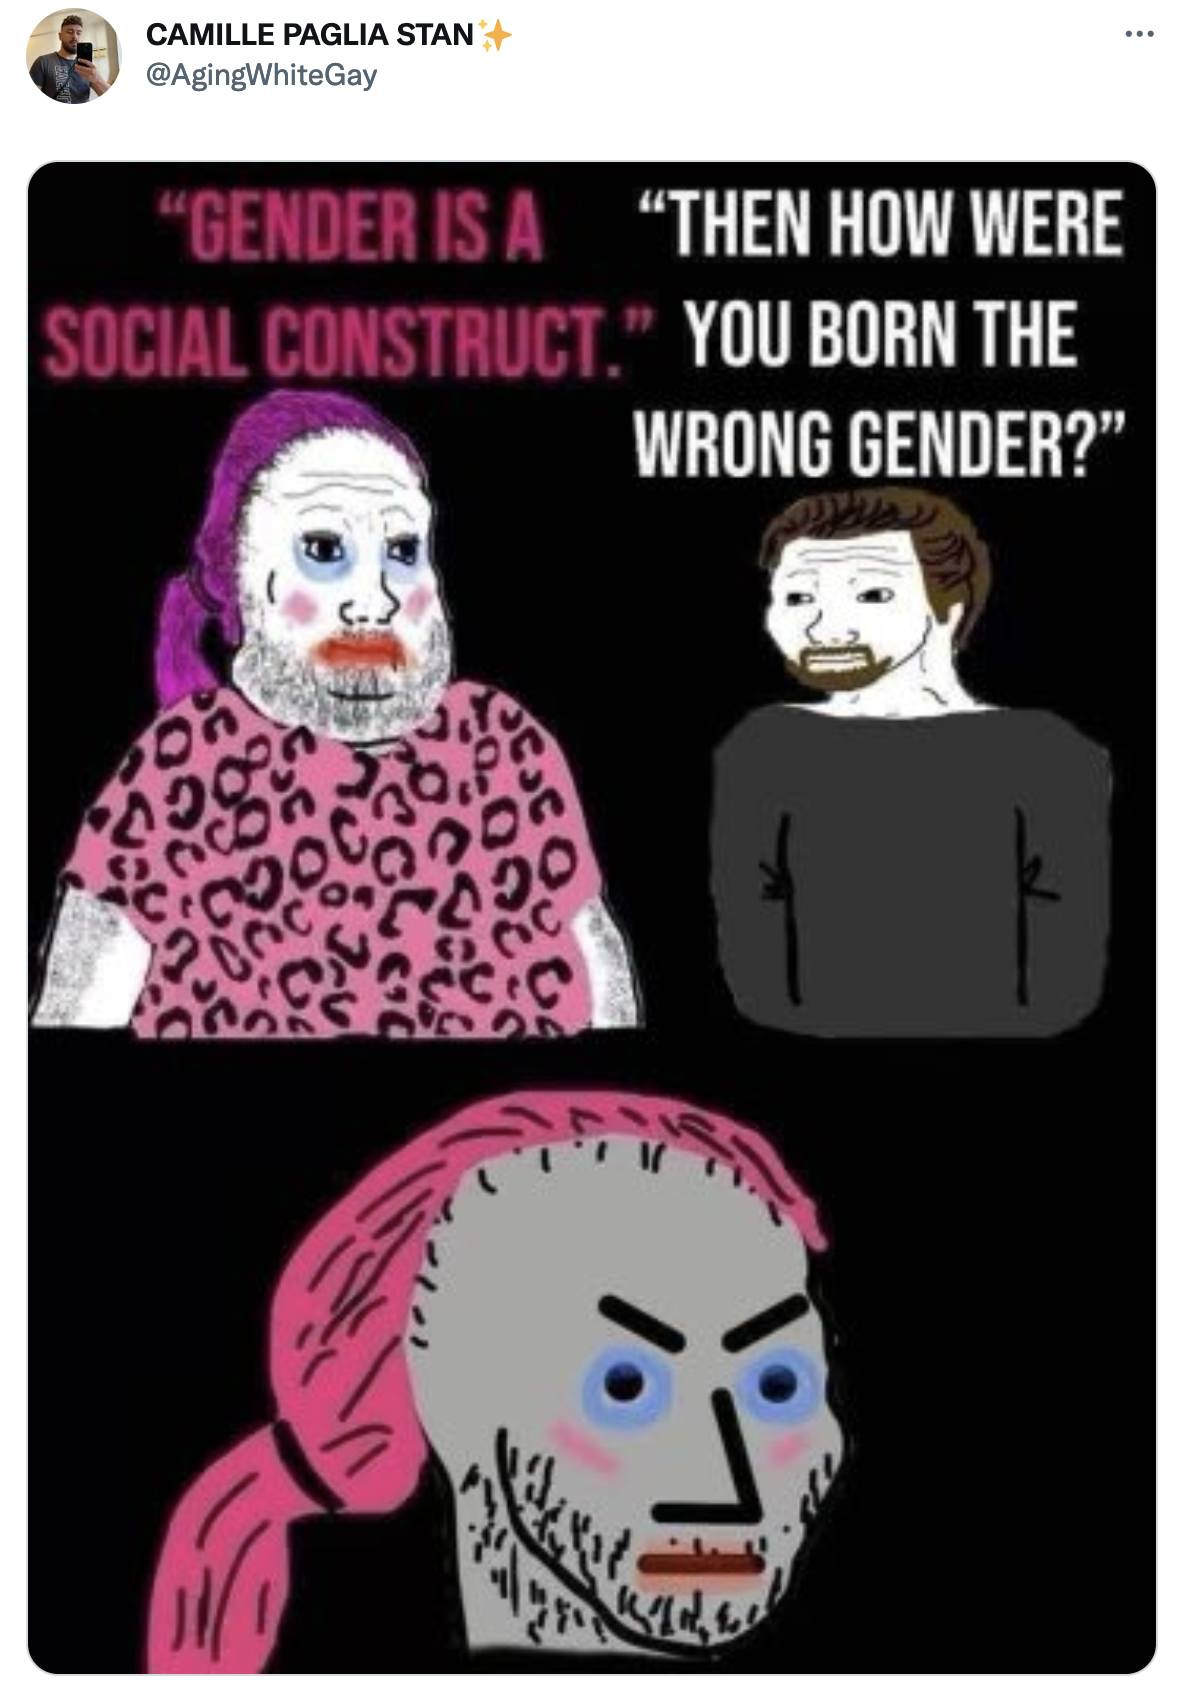 May be a cartoon of ‎2 people and ‎text that says '‎CAMILLE PAGLIA STAN @AgingWhiteGay … GENDER "THEN HOW WERE SOCIAL CONSTRUCT YOU BORN THE WRONG GENDER?" هلی‎'‎‎